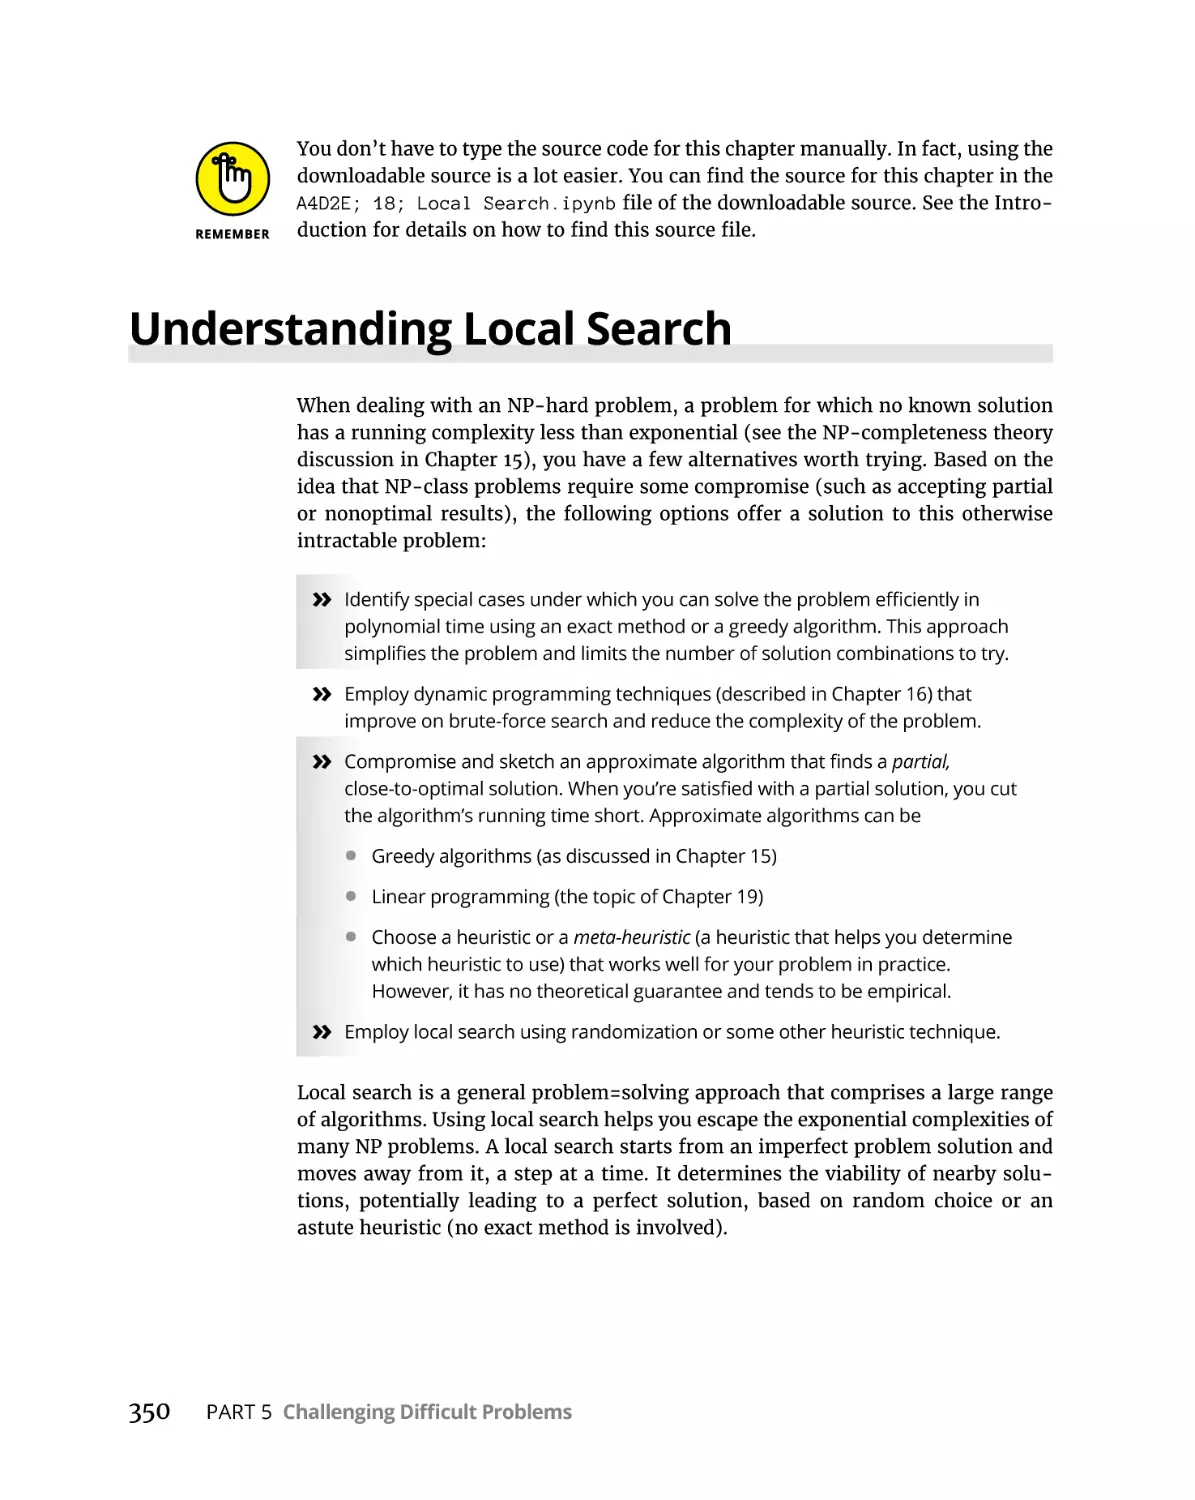 Understanding Local Search